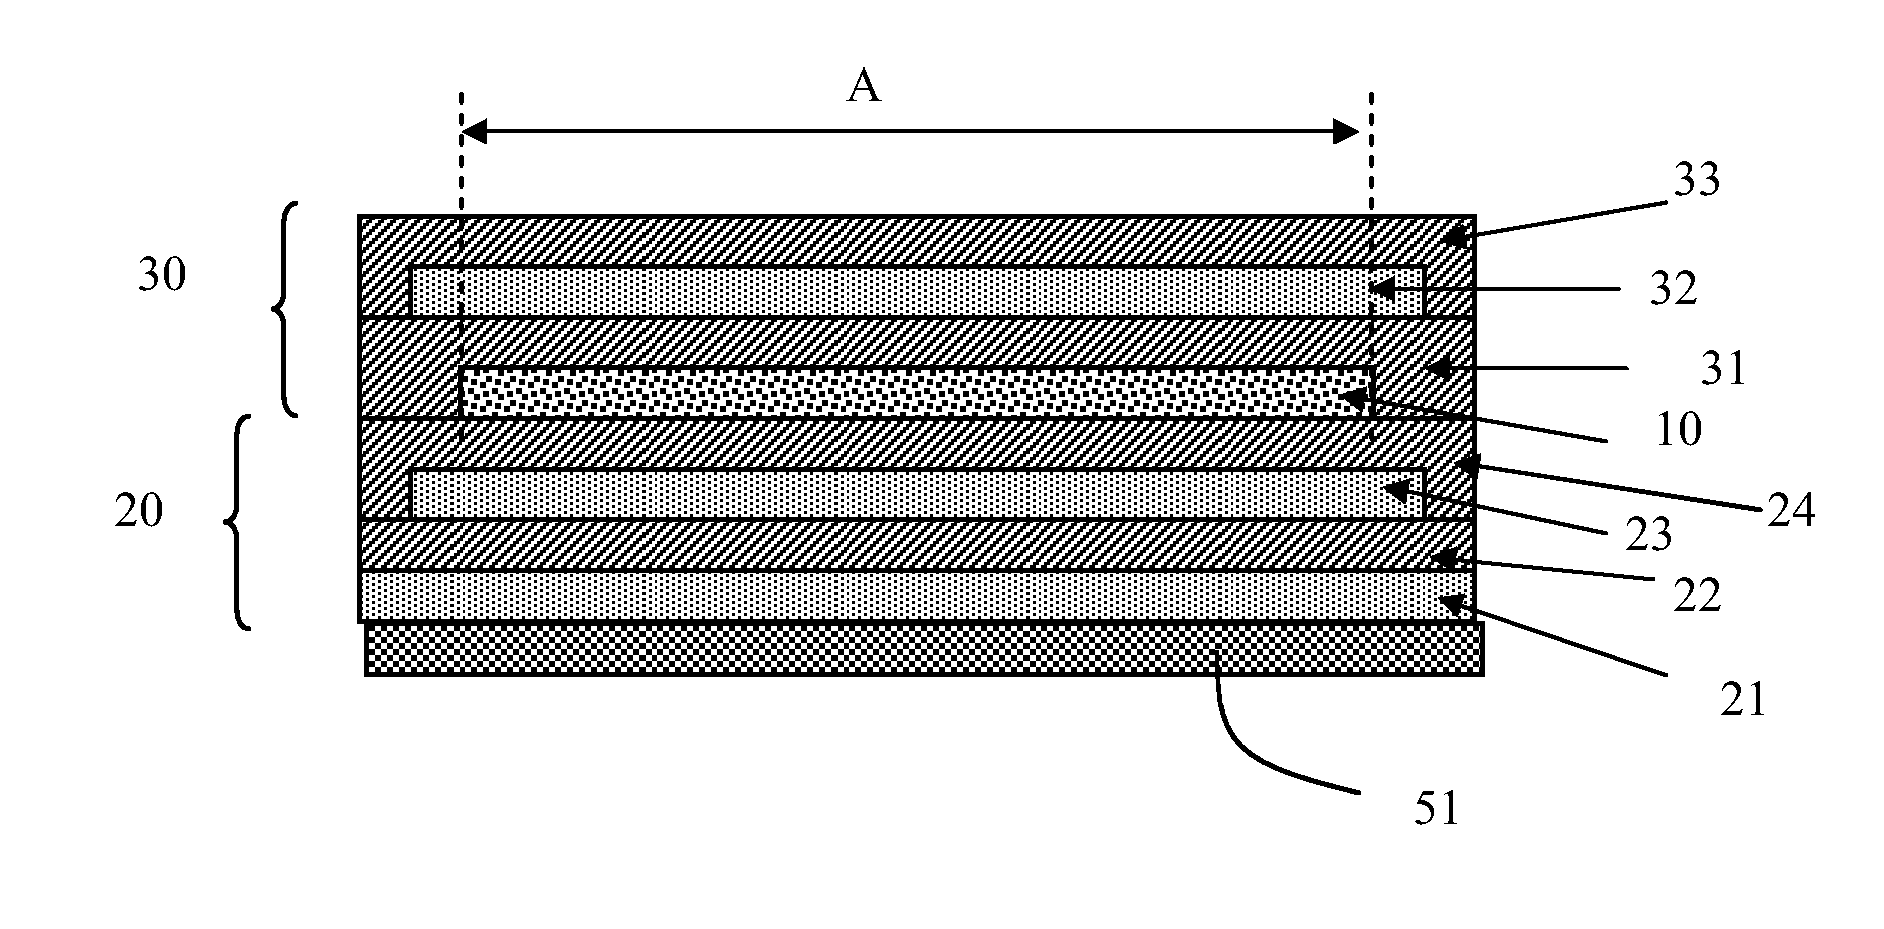 Encapsulated electronic device and method of manufacturing